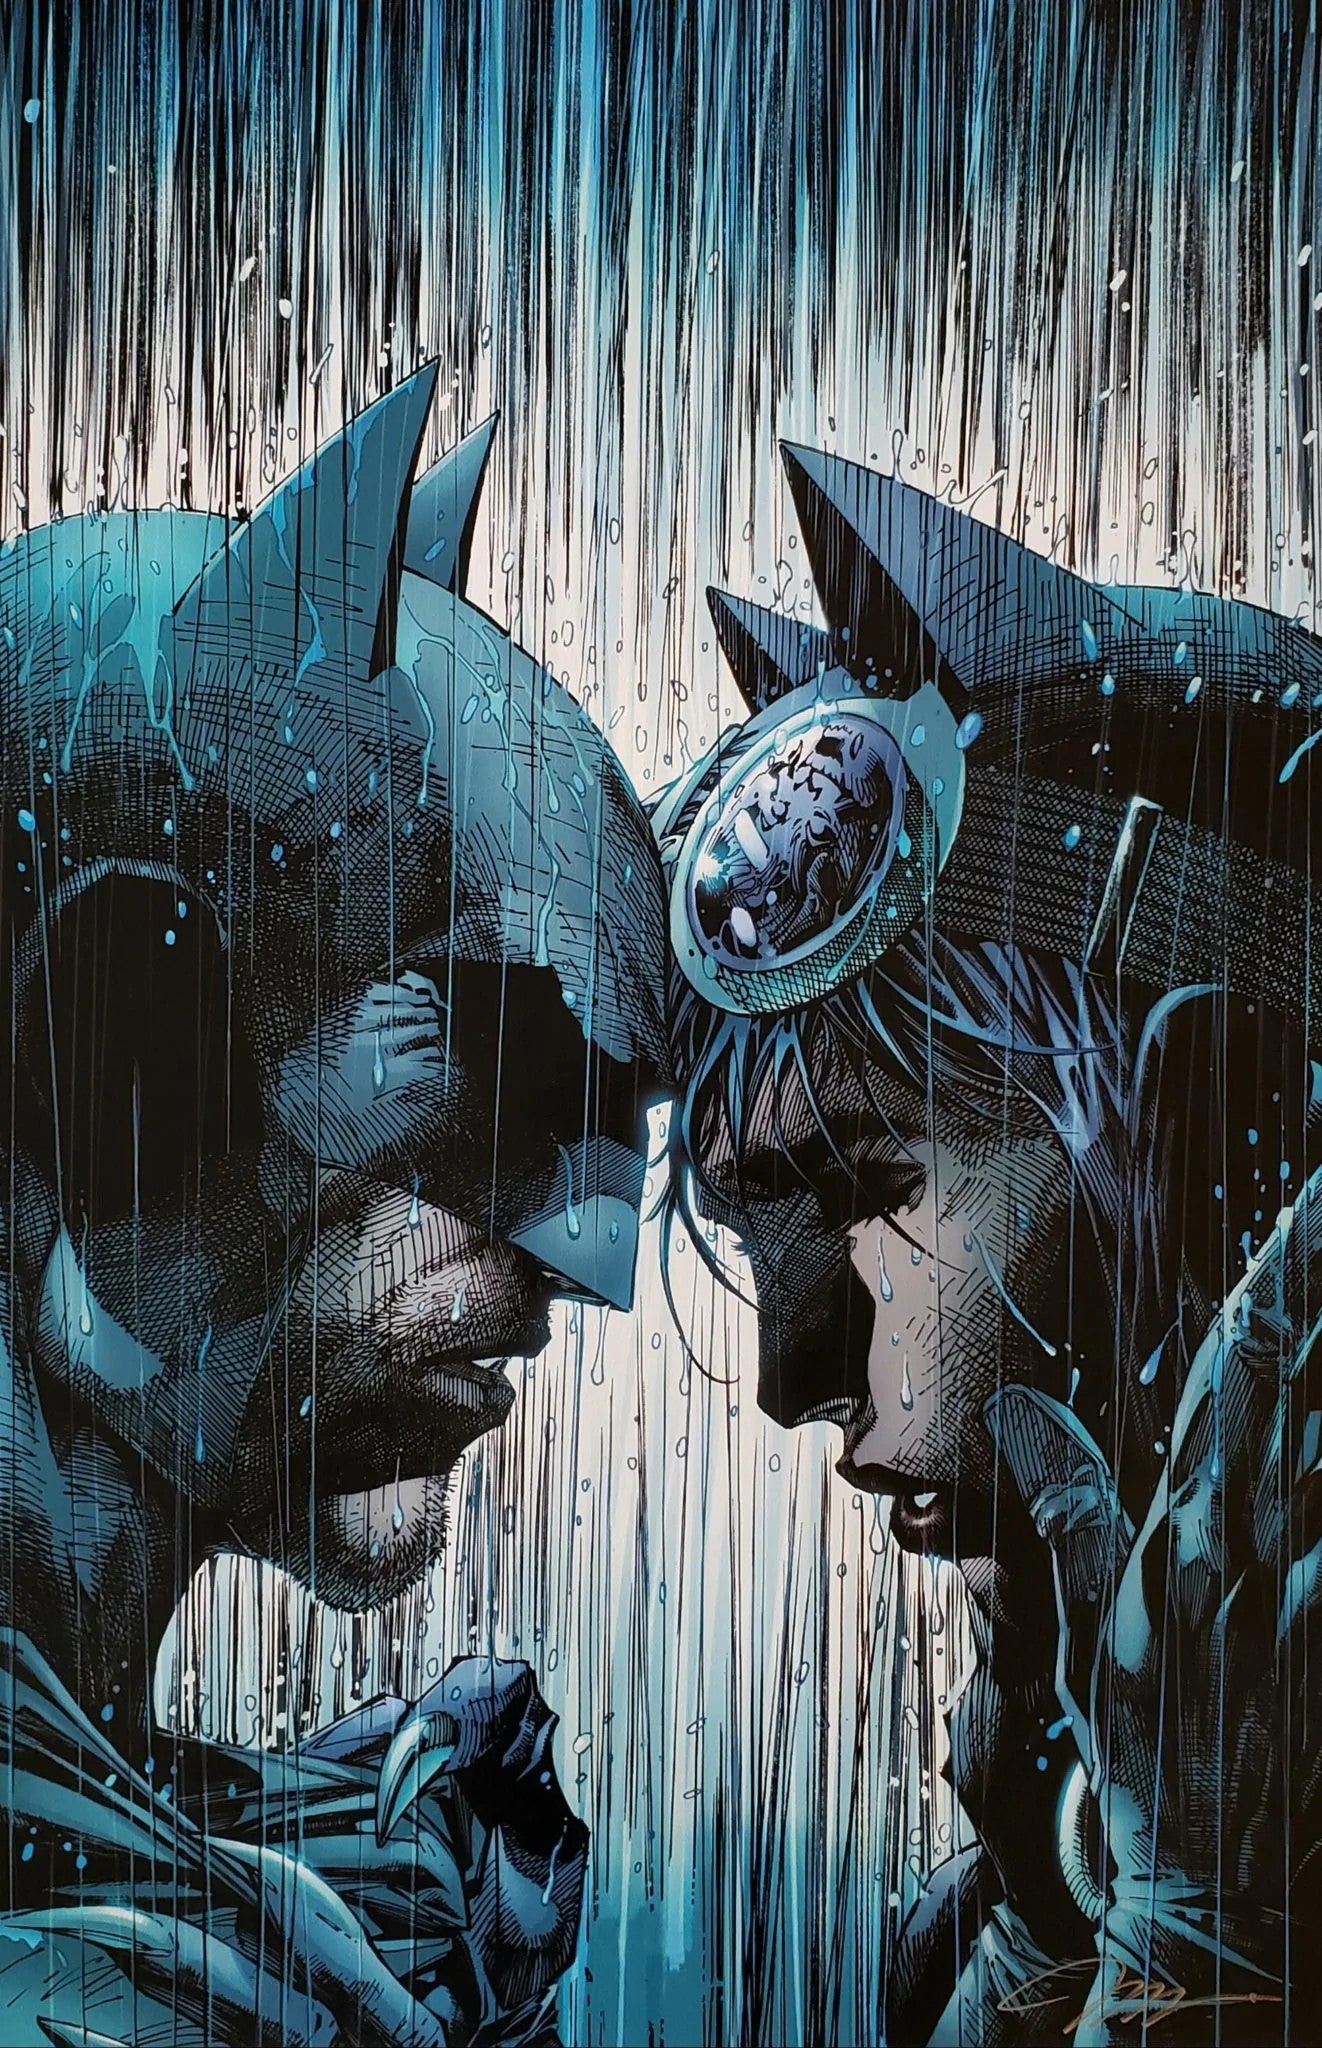 Bring on the Rain - By Jim Lee - Giclée on Paper inspired by Batman